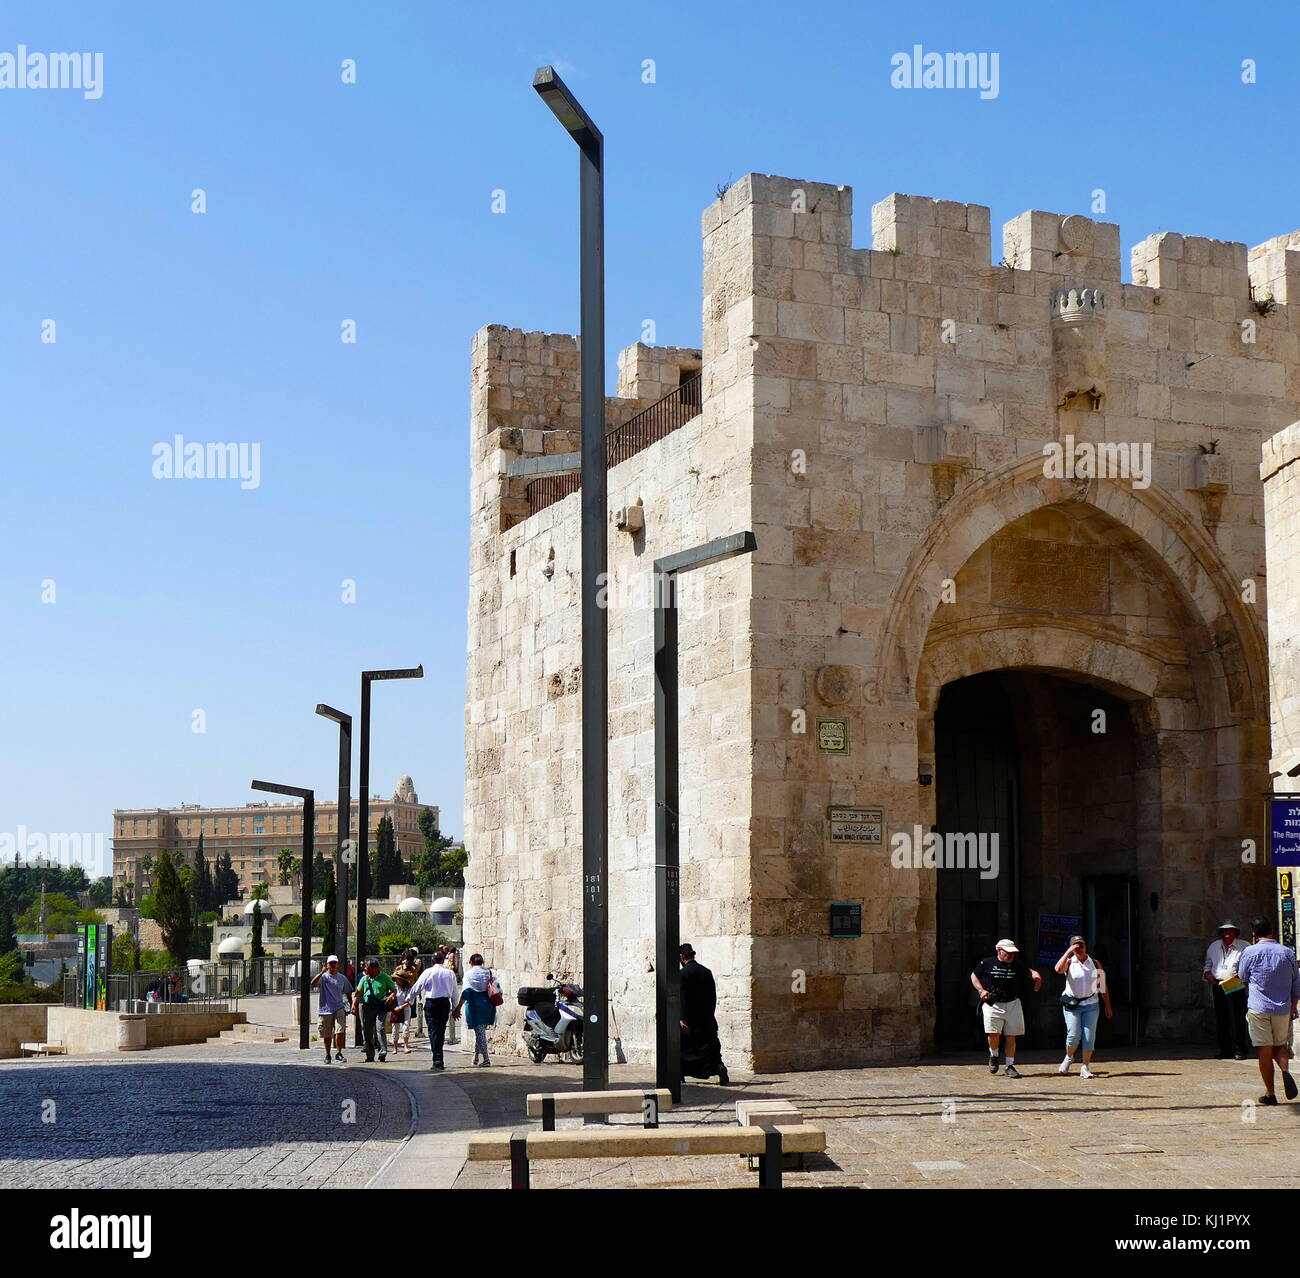 Ottoman Turkish architecture of the Jaffa Gate entrance to the old city of Jerusalem, Israel Stock Photo